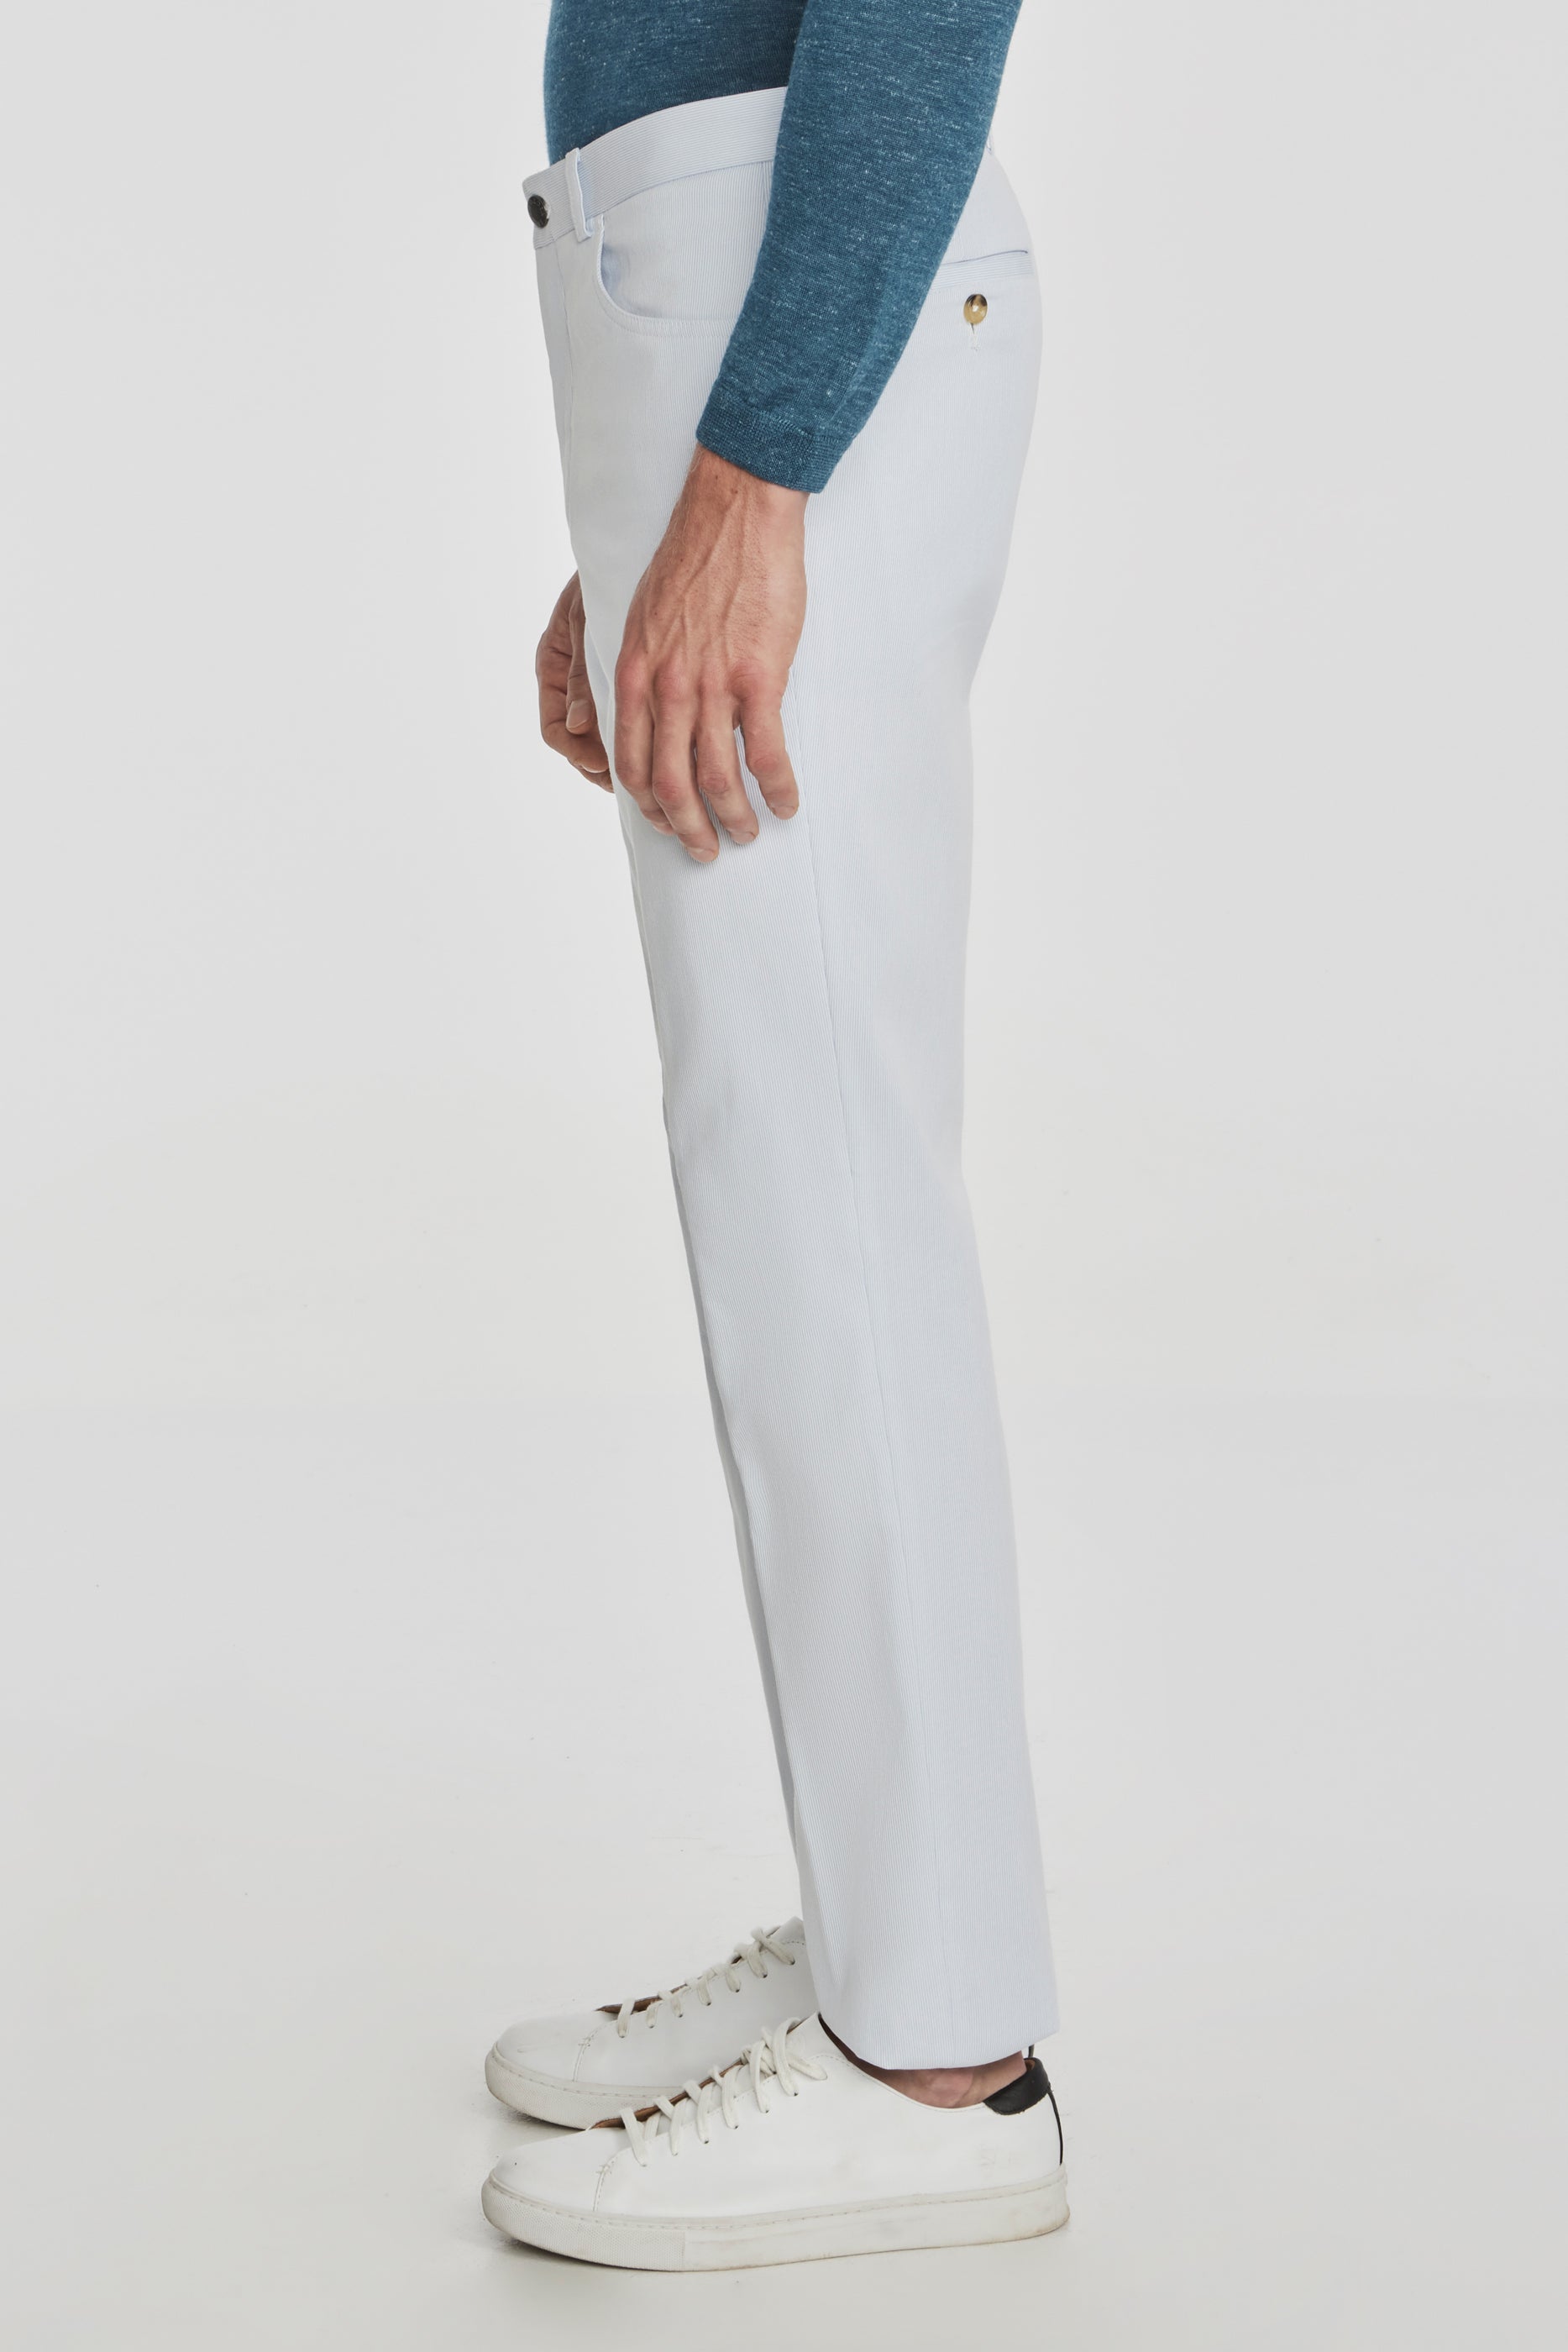 Alt view 4 Pinfeather Sage 5-Pocket Stretch Cotton Pant in Light Blue